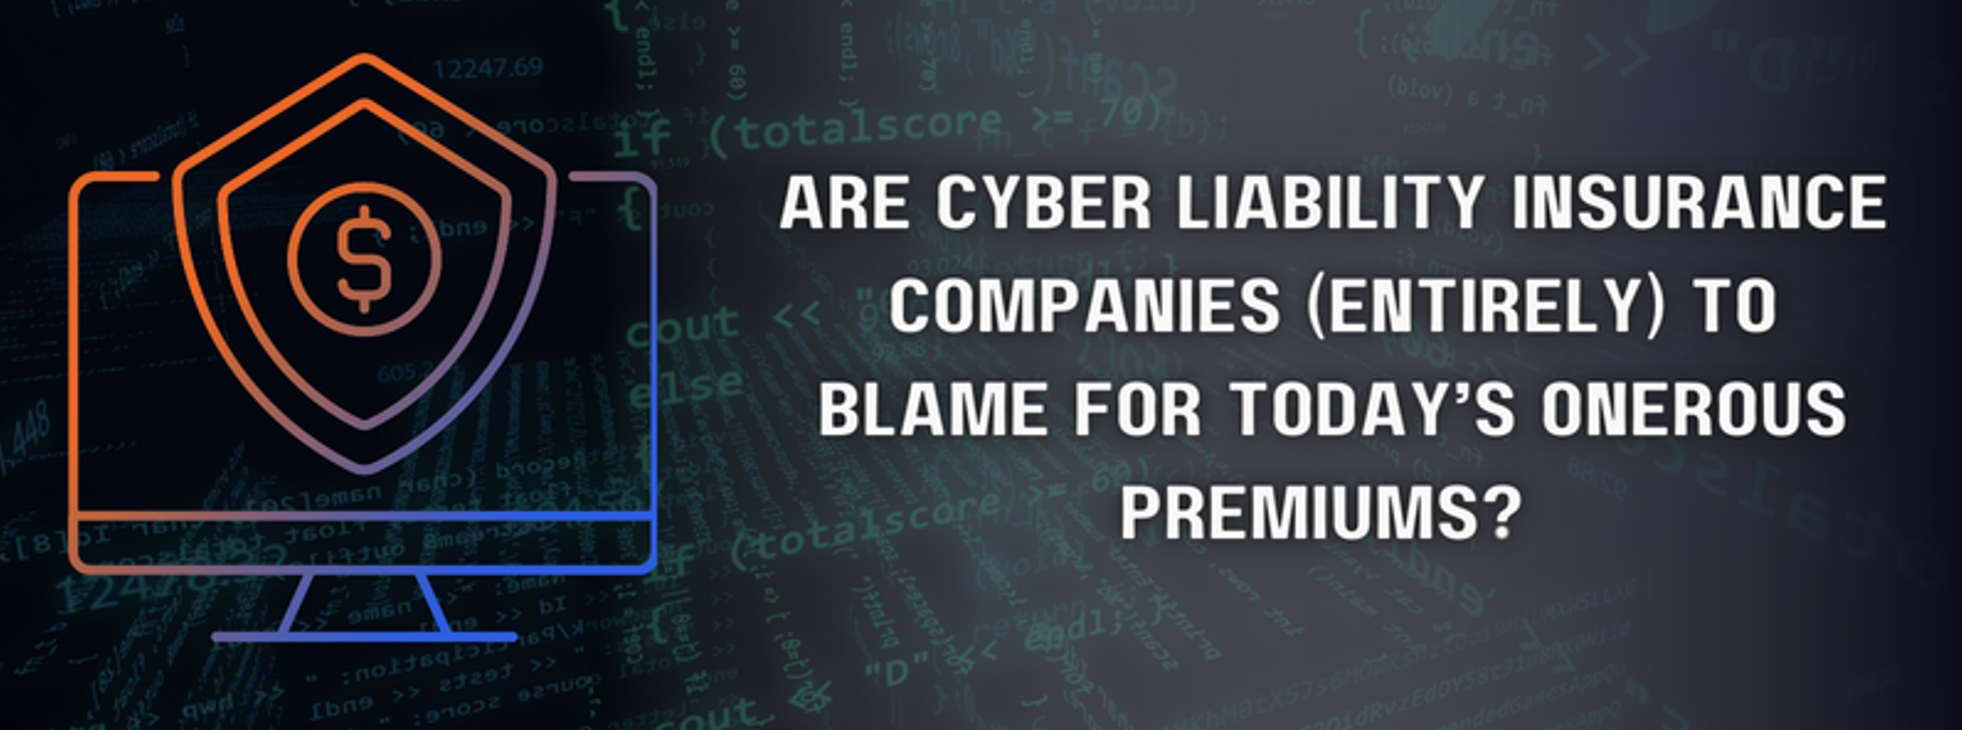 Are Cyber Liability Insurance Companies (Entirely) to Blame for Today’s Onerous Premiums